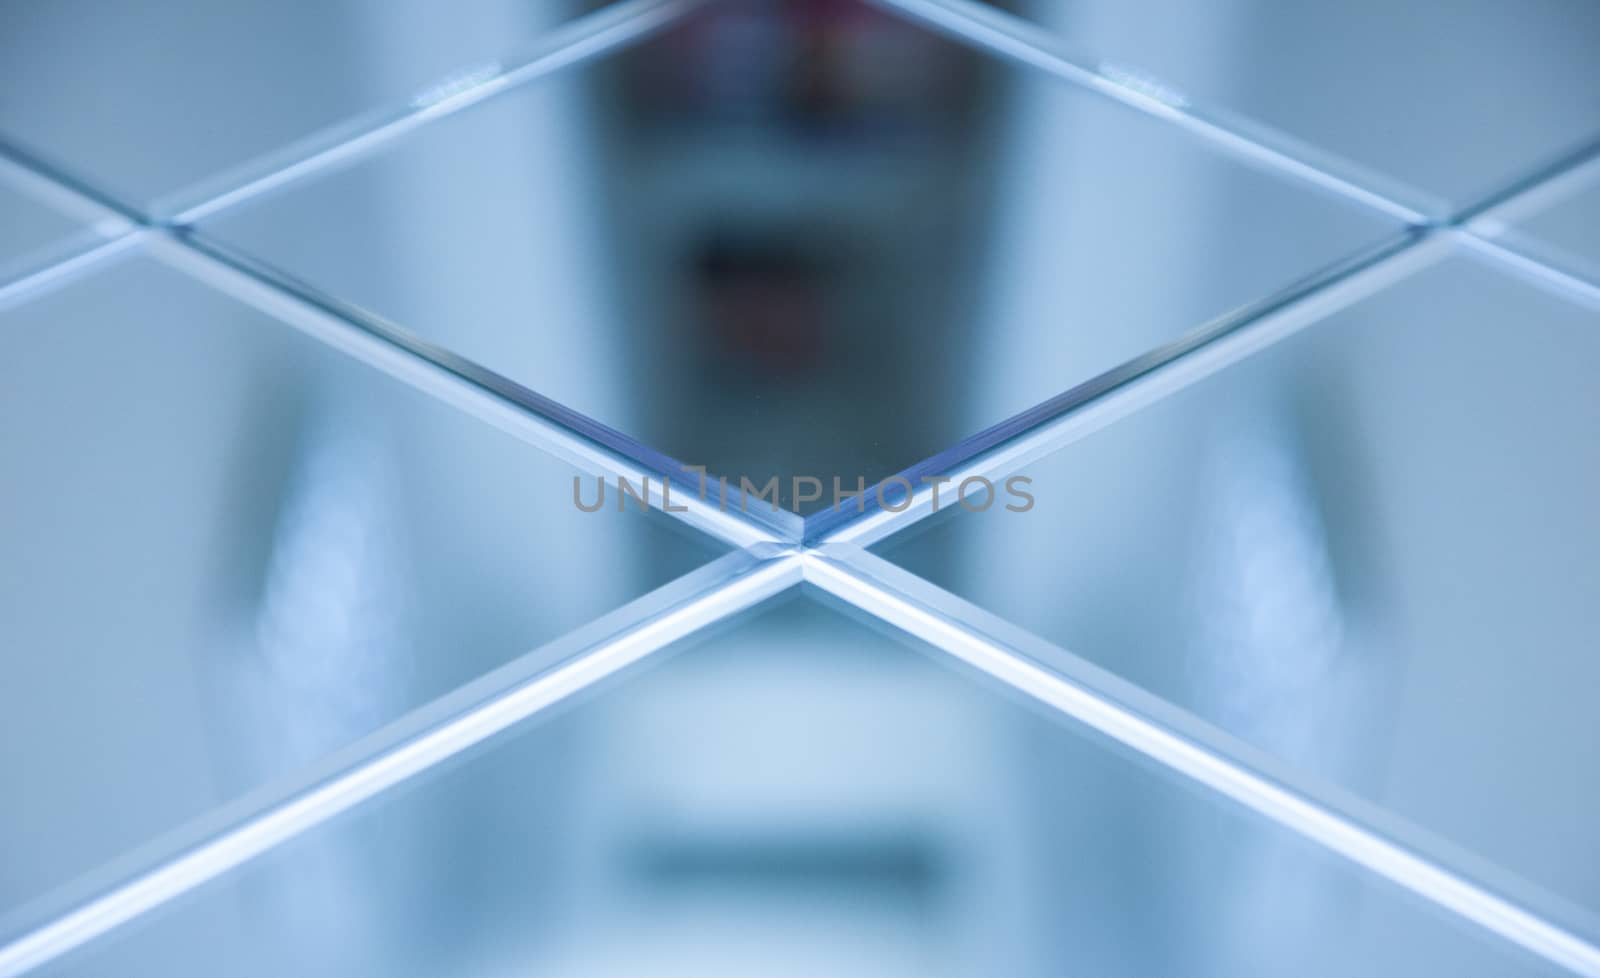 Glass, mirror reflection shapes and shadows. Close-up details.  Abstract geometric design with parallel and intersecting lines. Graphical representation of angle